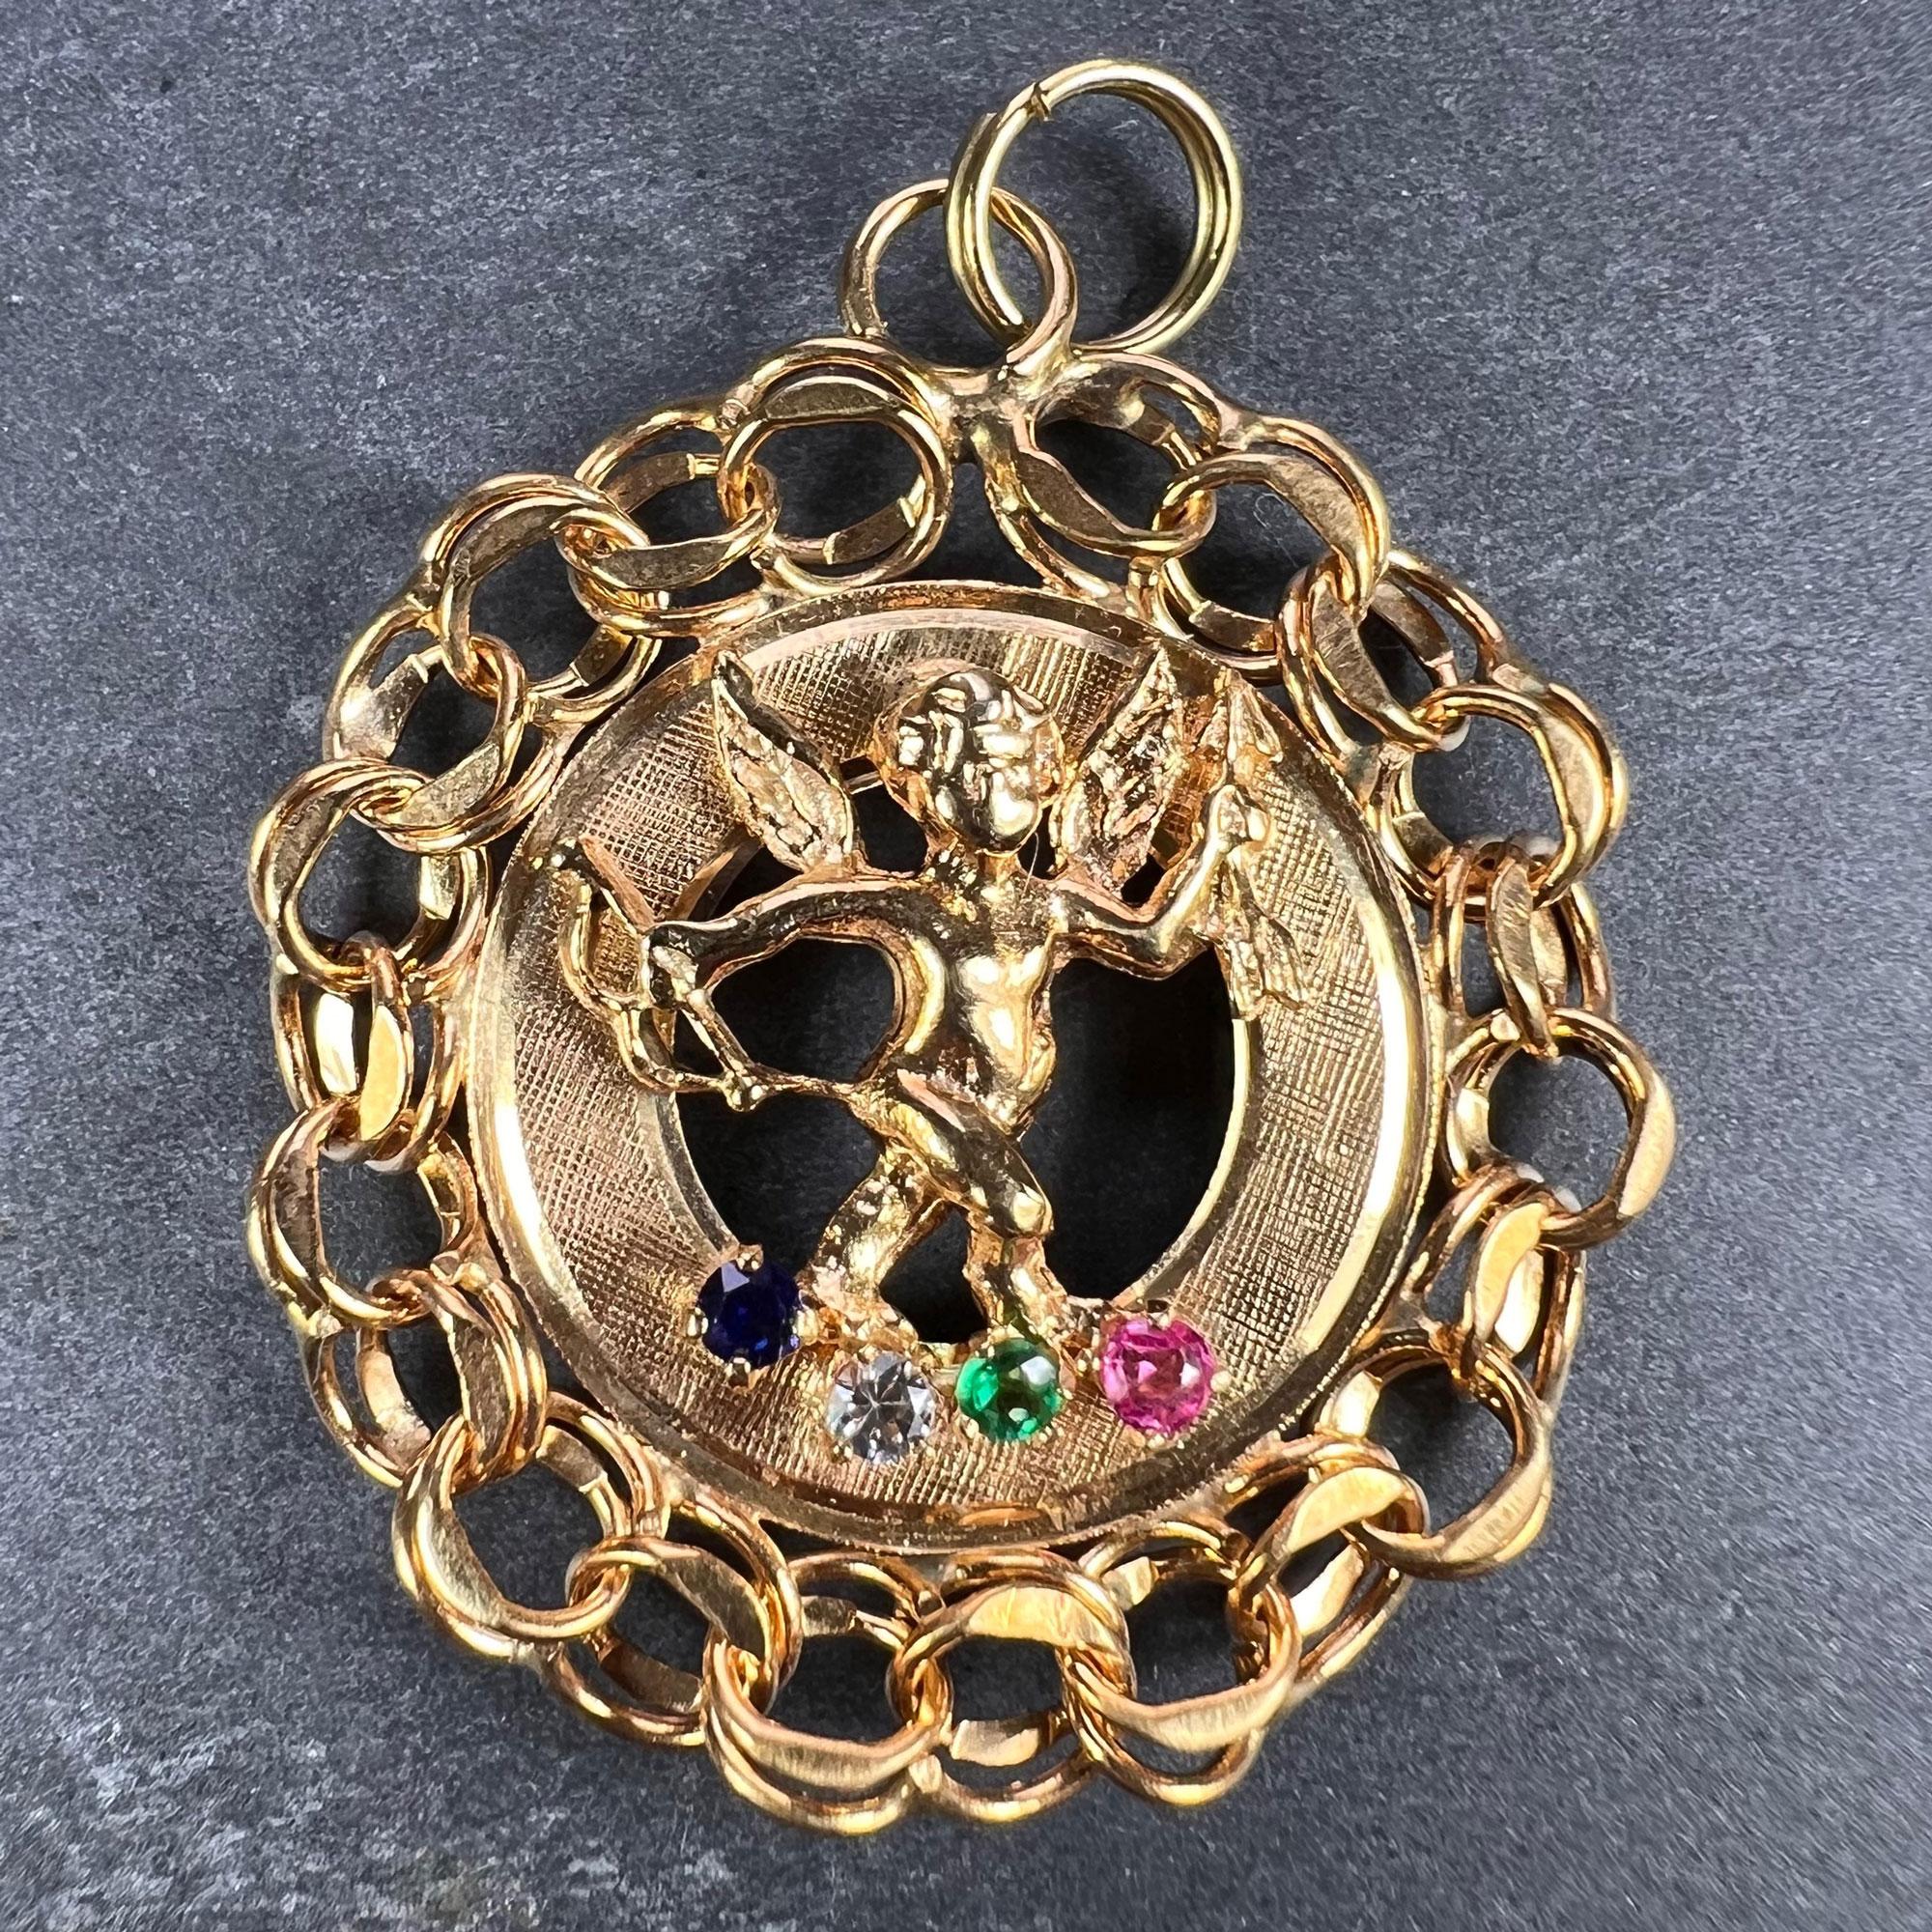 A large 14 karat (14K) yellow gold charm pendant designed as a cupid with bow and arrow standing over red, blue, green and white paste in a circular frame. Unmarked but tested for 14 karat gold.

Dimensions: 3.3 x 2.9 x 0.35 cm (not including jump